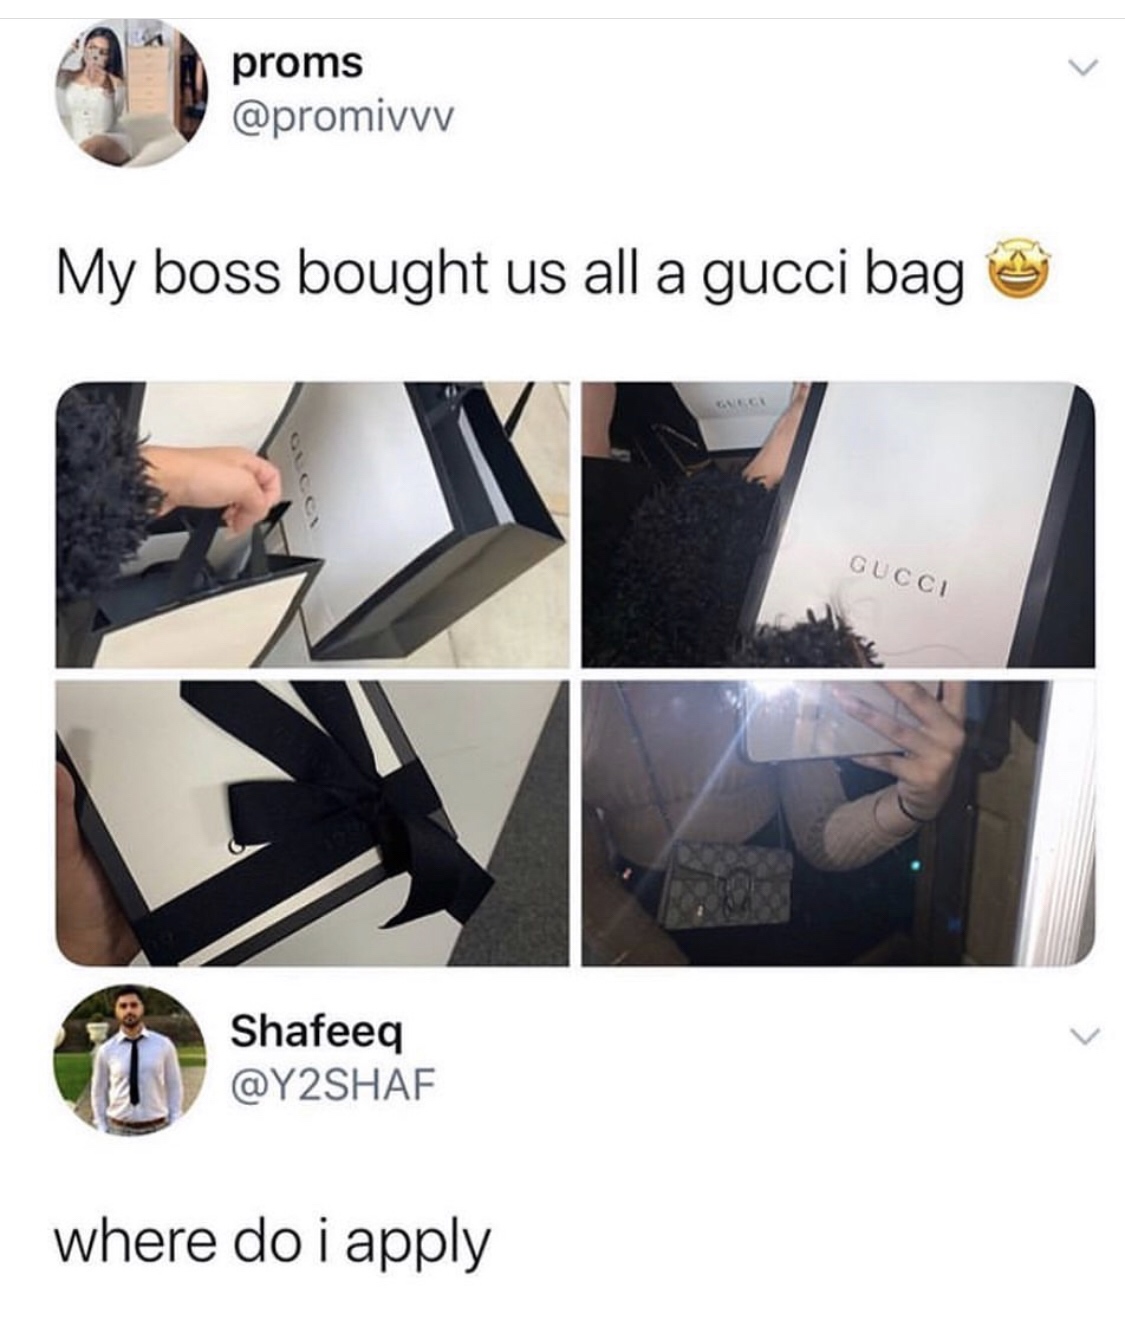 material - proms My boss bought us all a gucci bag & Gucci Shafeeq where doi apply